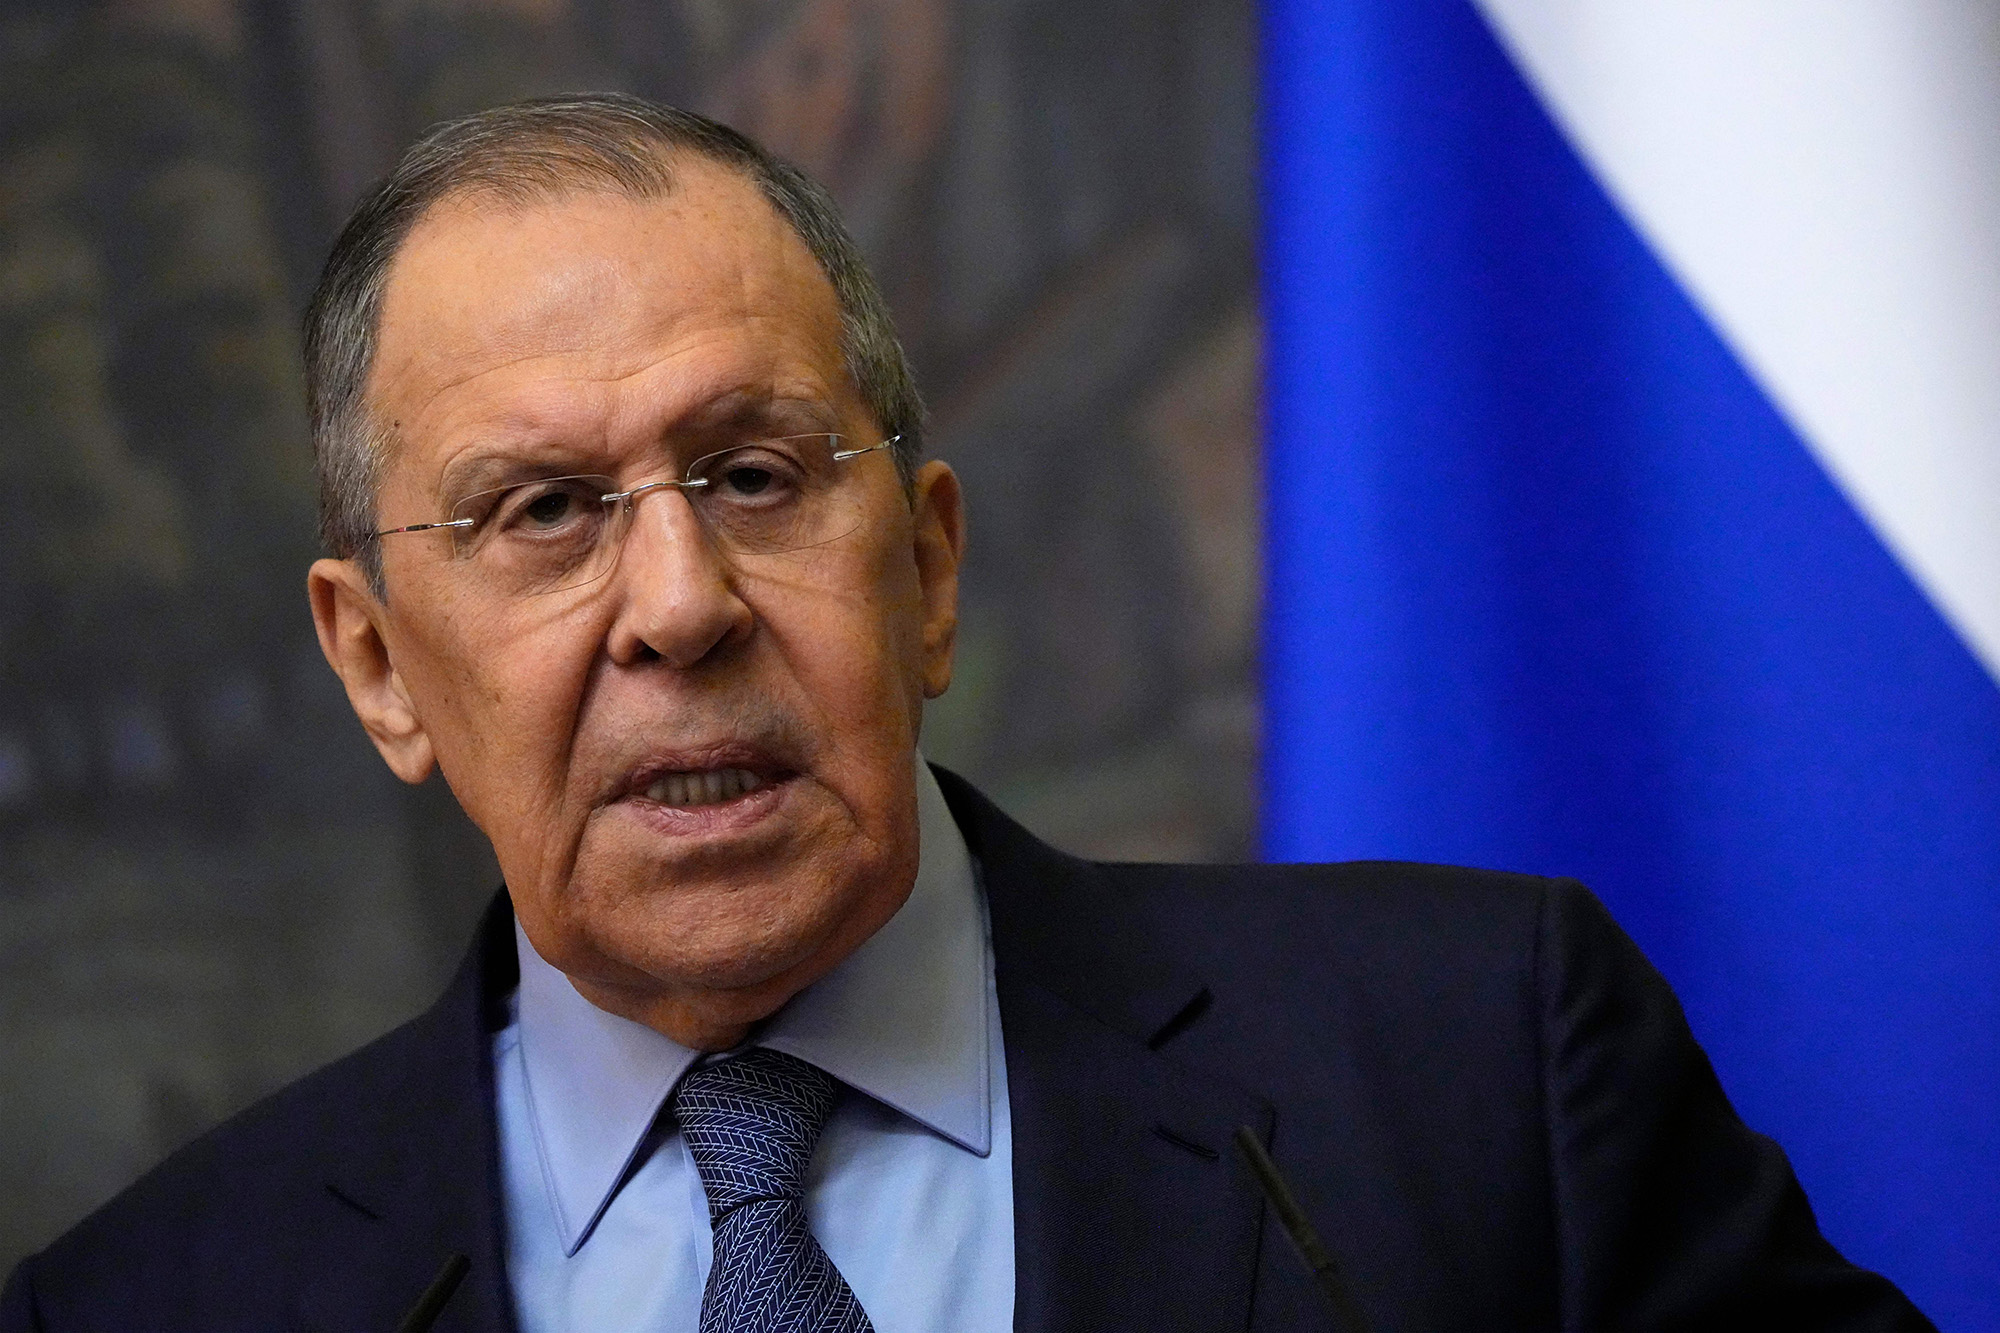 Russian Foreign Minister Sergey Lavrov speaks during a press conference in Moscow on April 7.